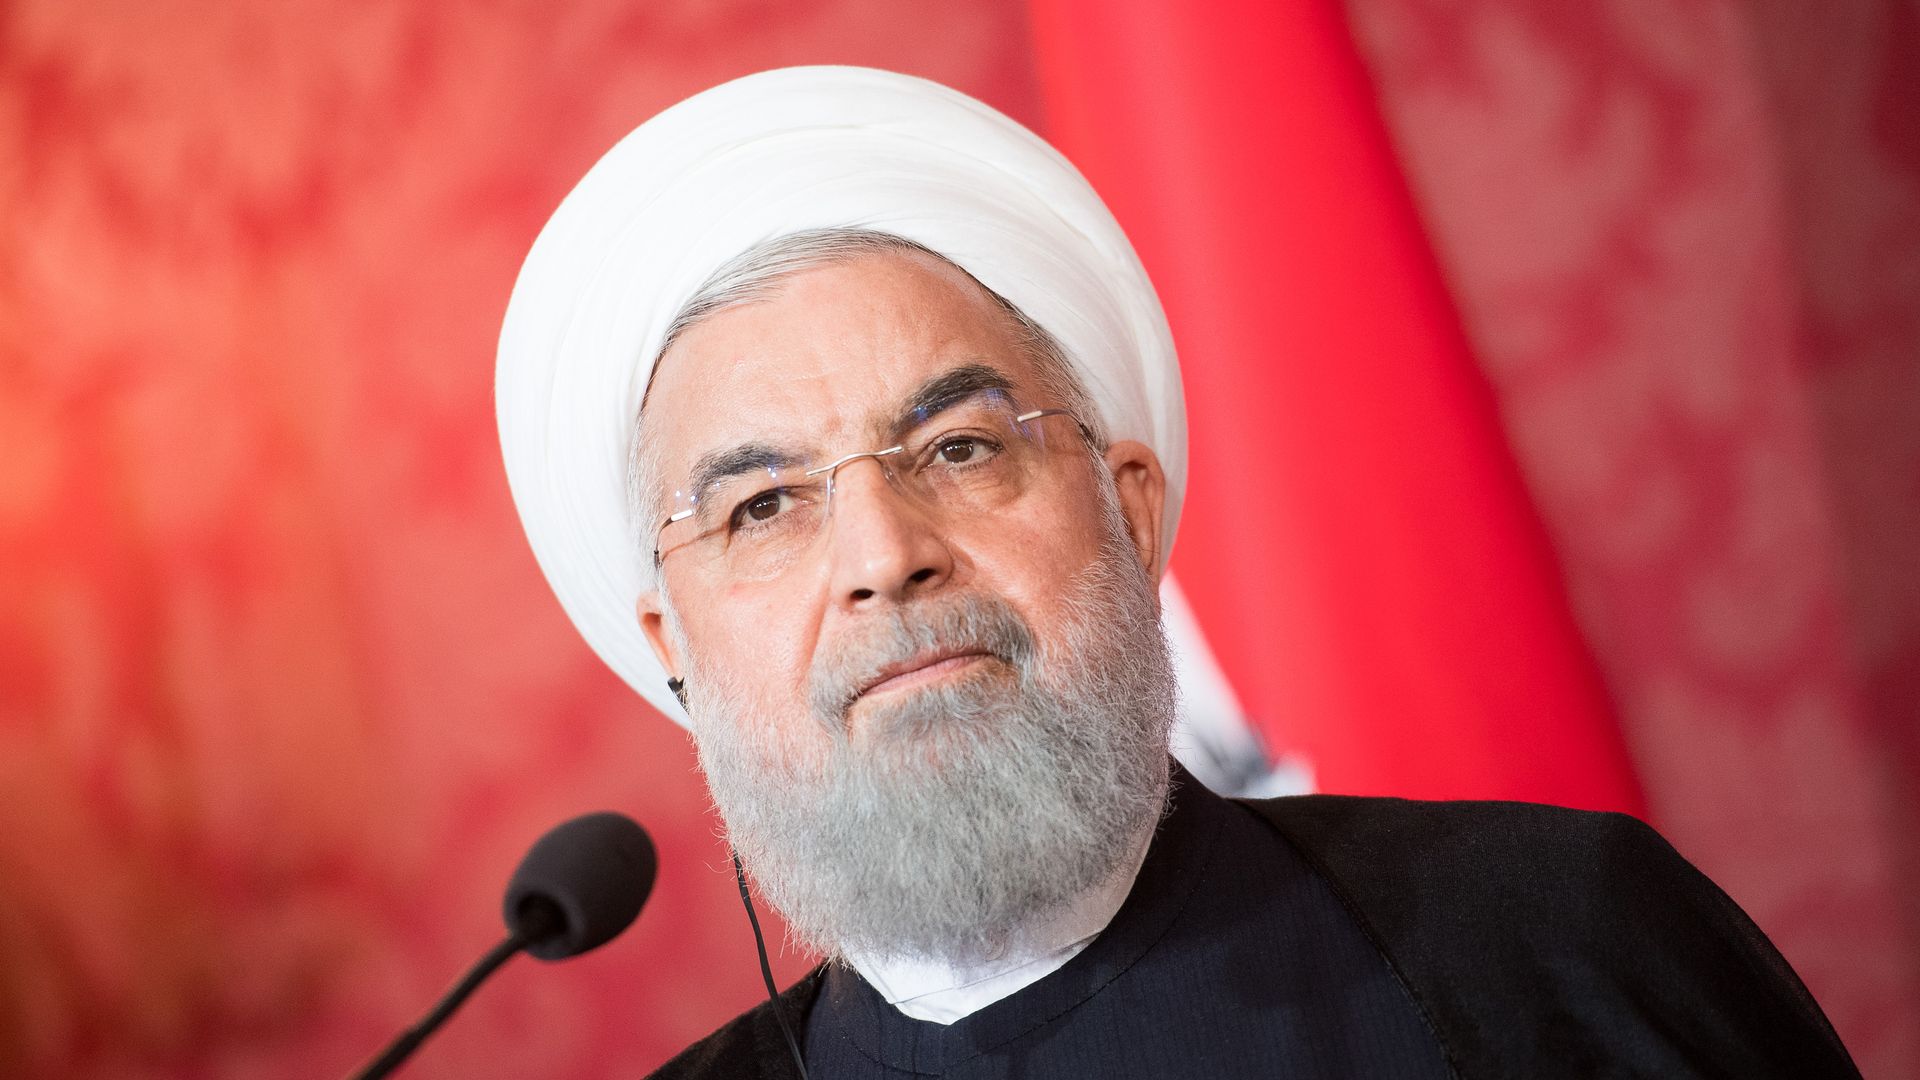 Hassan Rouhani in white head covering, black shirt, before red background looking stern.